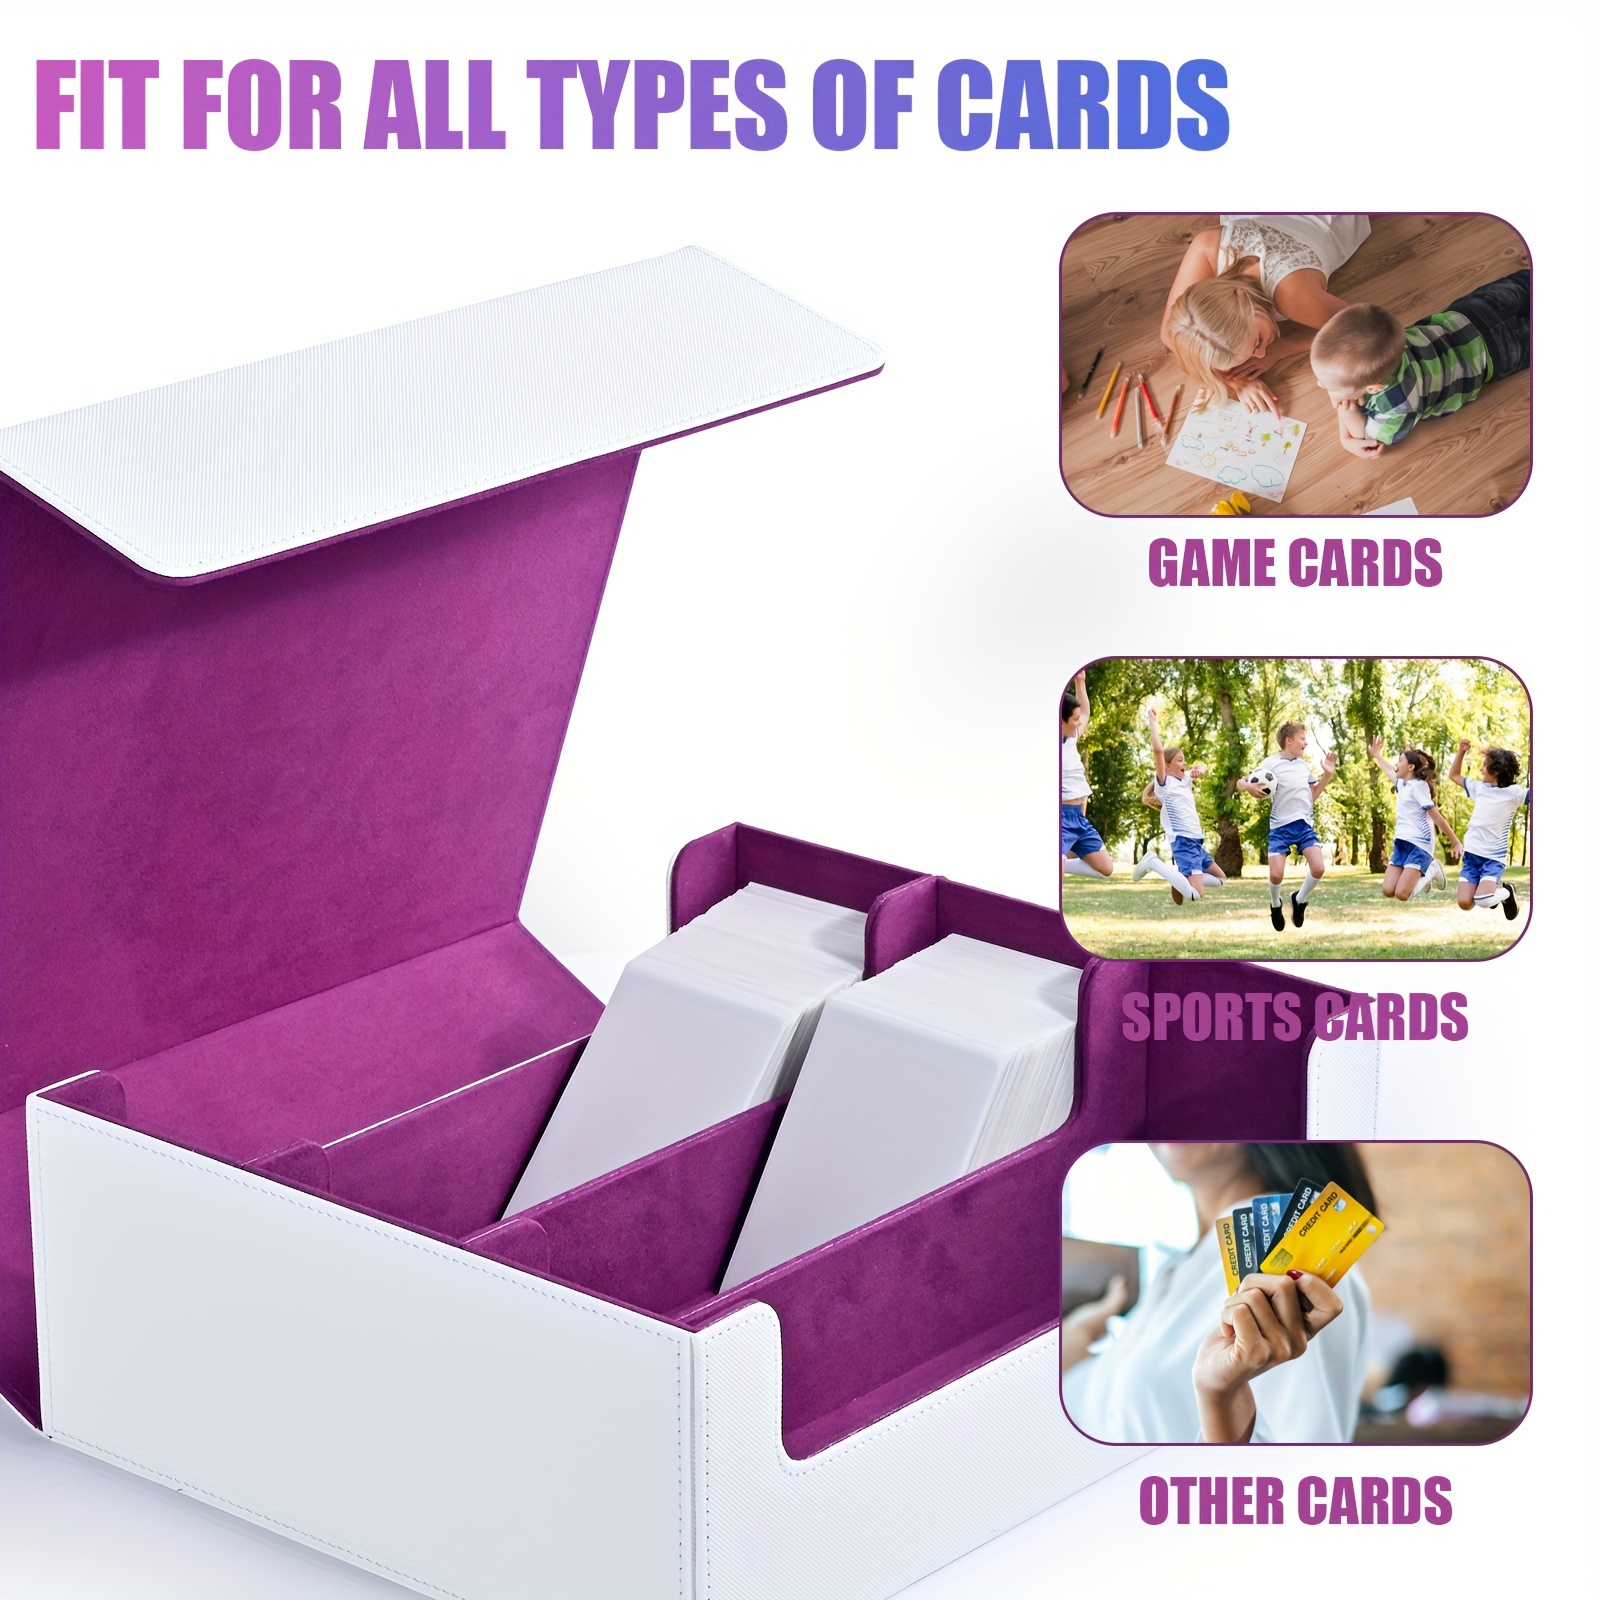 Card Storage Box For Trading Cards, Card Deck Case Holds 1800+